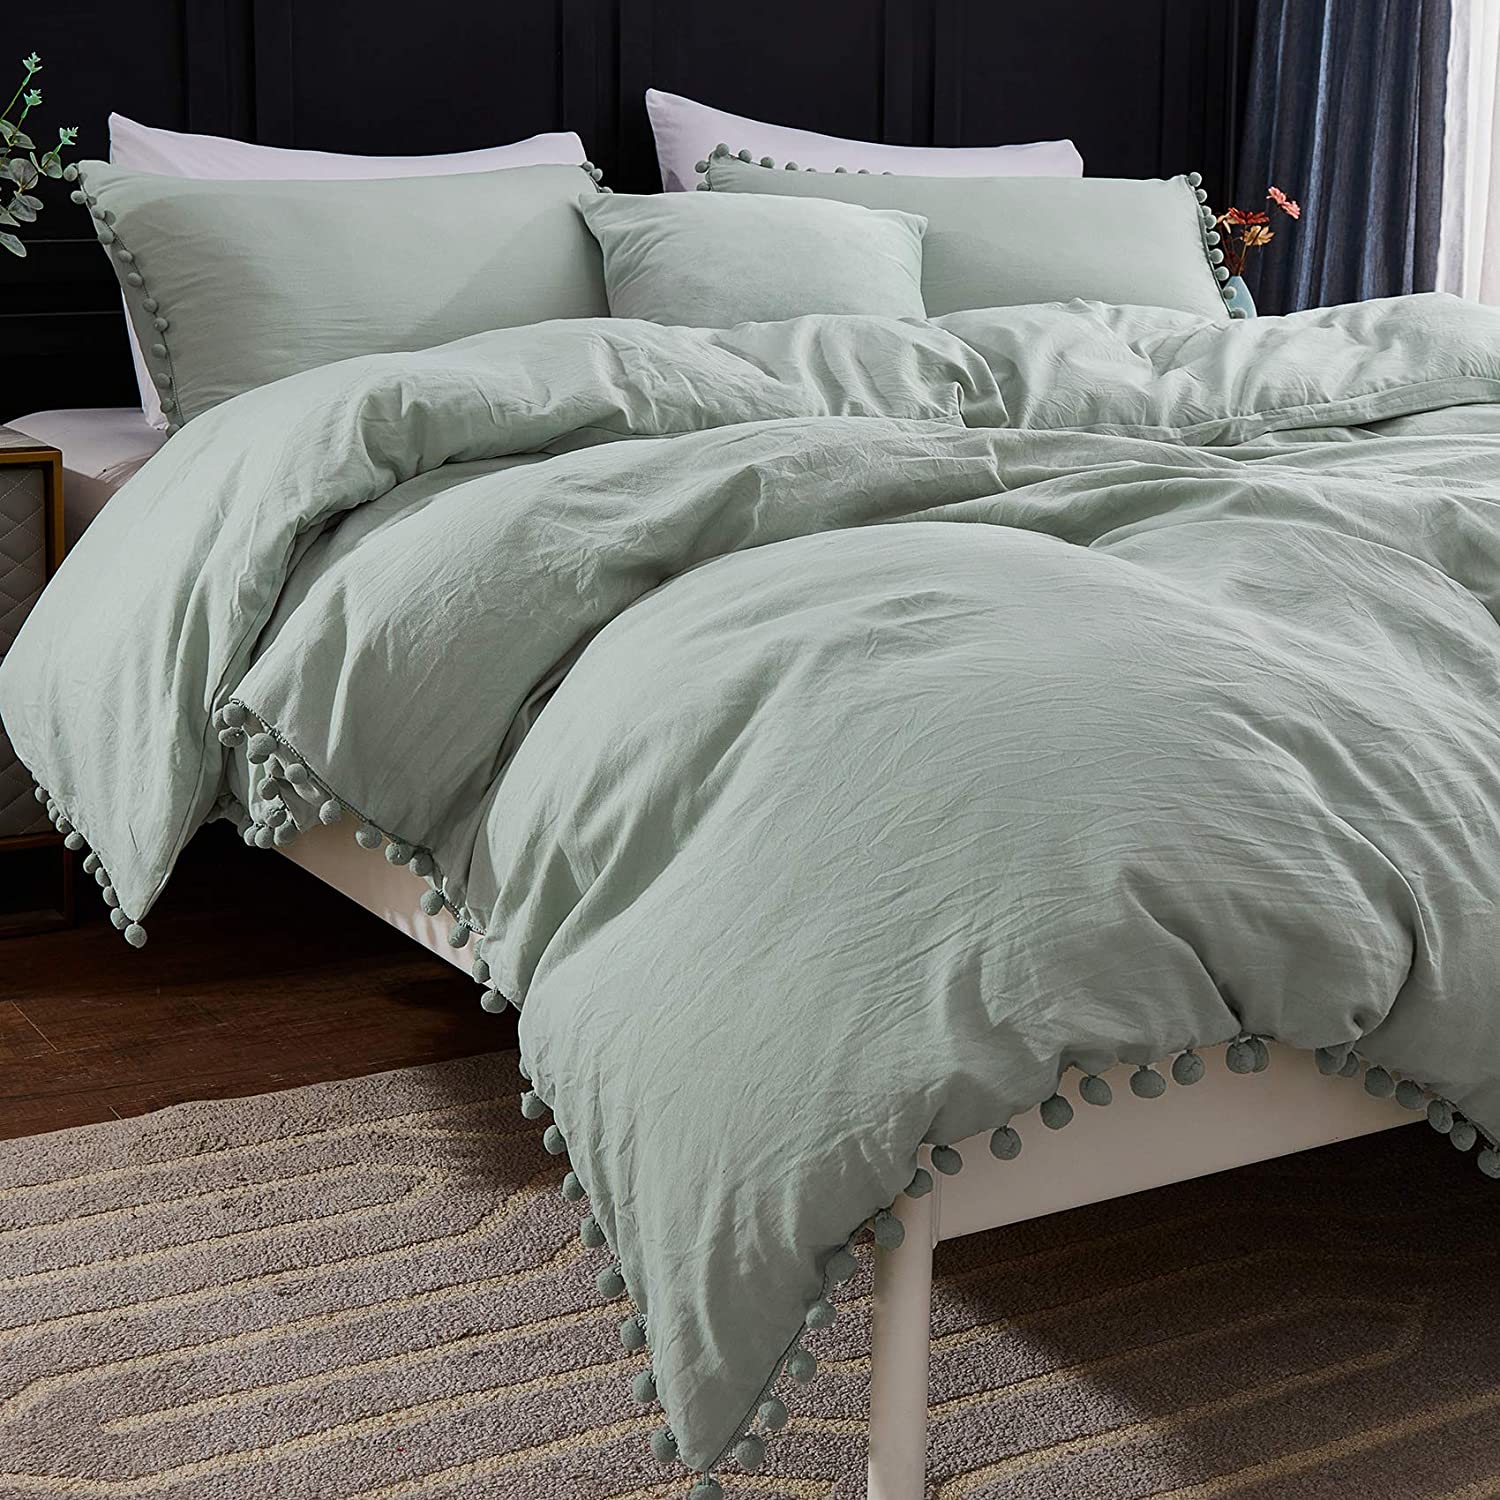 Price:$38.99 Andency Pom Pom Fringe Duvet Cover Queen Size (90x90 Inch), 3 Pieces (1 Solid Sage Green Duvet Cover, 2 Pillowcases) Soft Washed Microfiber Duvet Cover Set with Zipper Closure, Corner Ties : Home & Kitchen